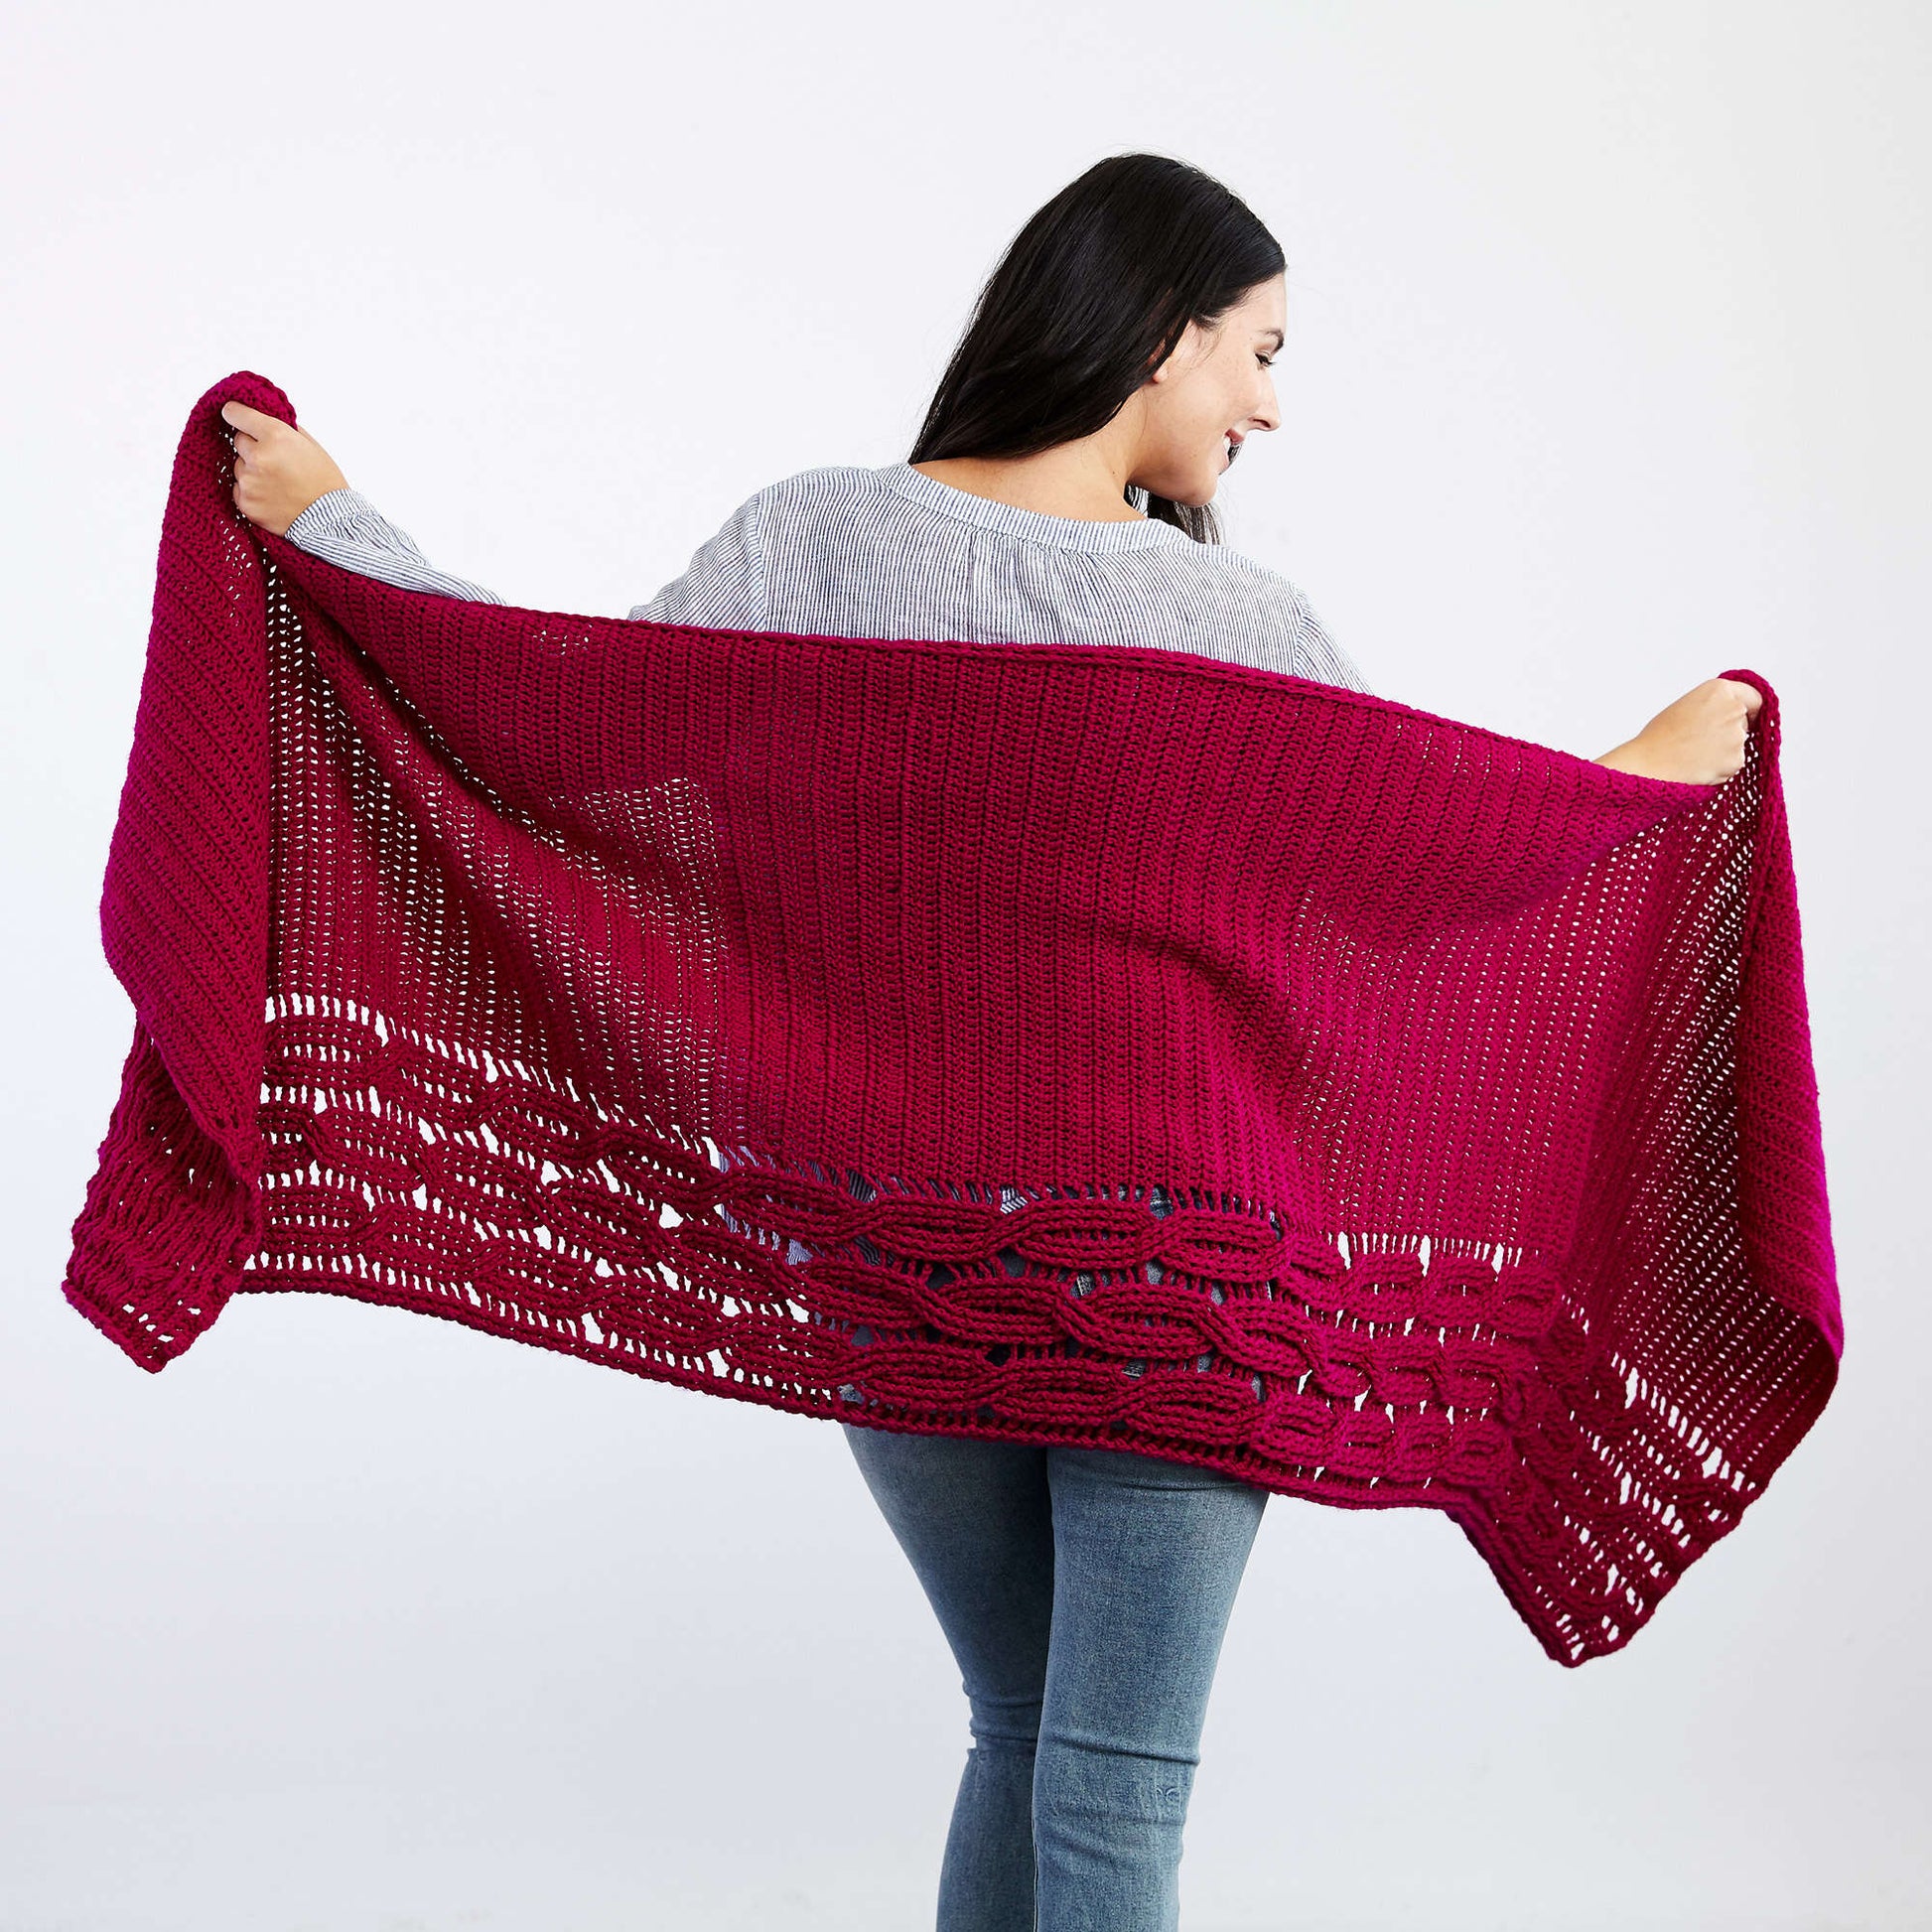 Free Red Heart Crochet Interwoven Cabled Chic Shawl Pattern